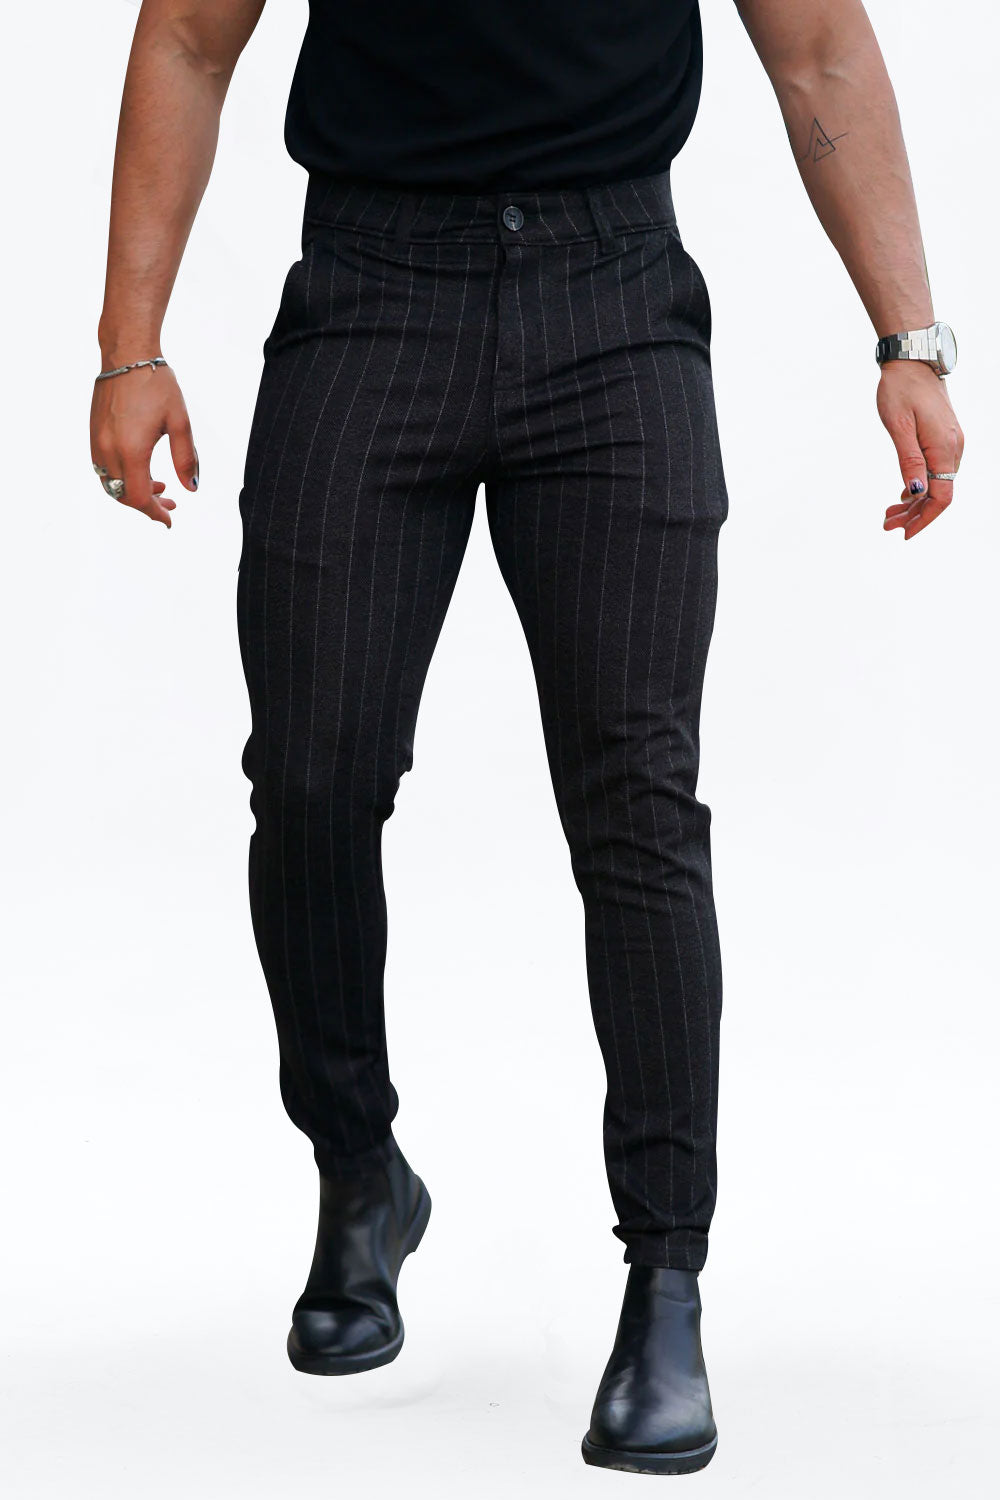 GINGTTO Mens Chinos Black Vertical Striped Trousers Slim Fit Stretch Skinny  Pant